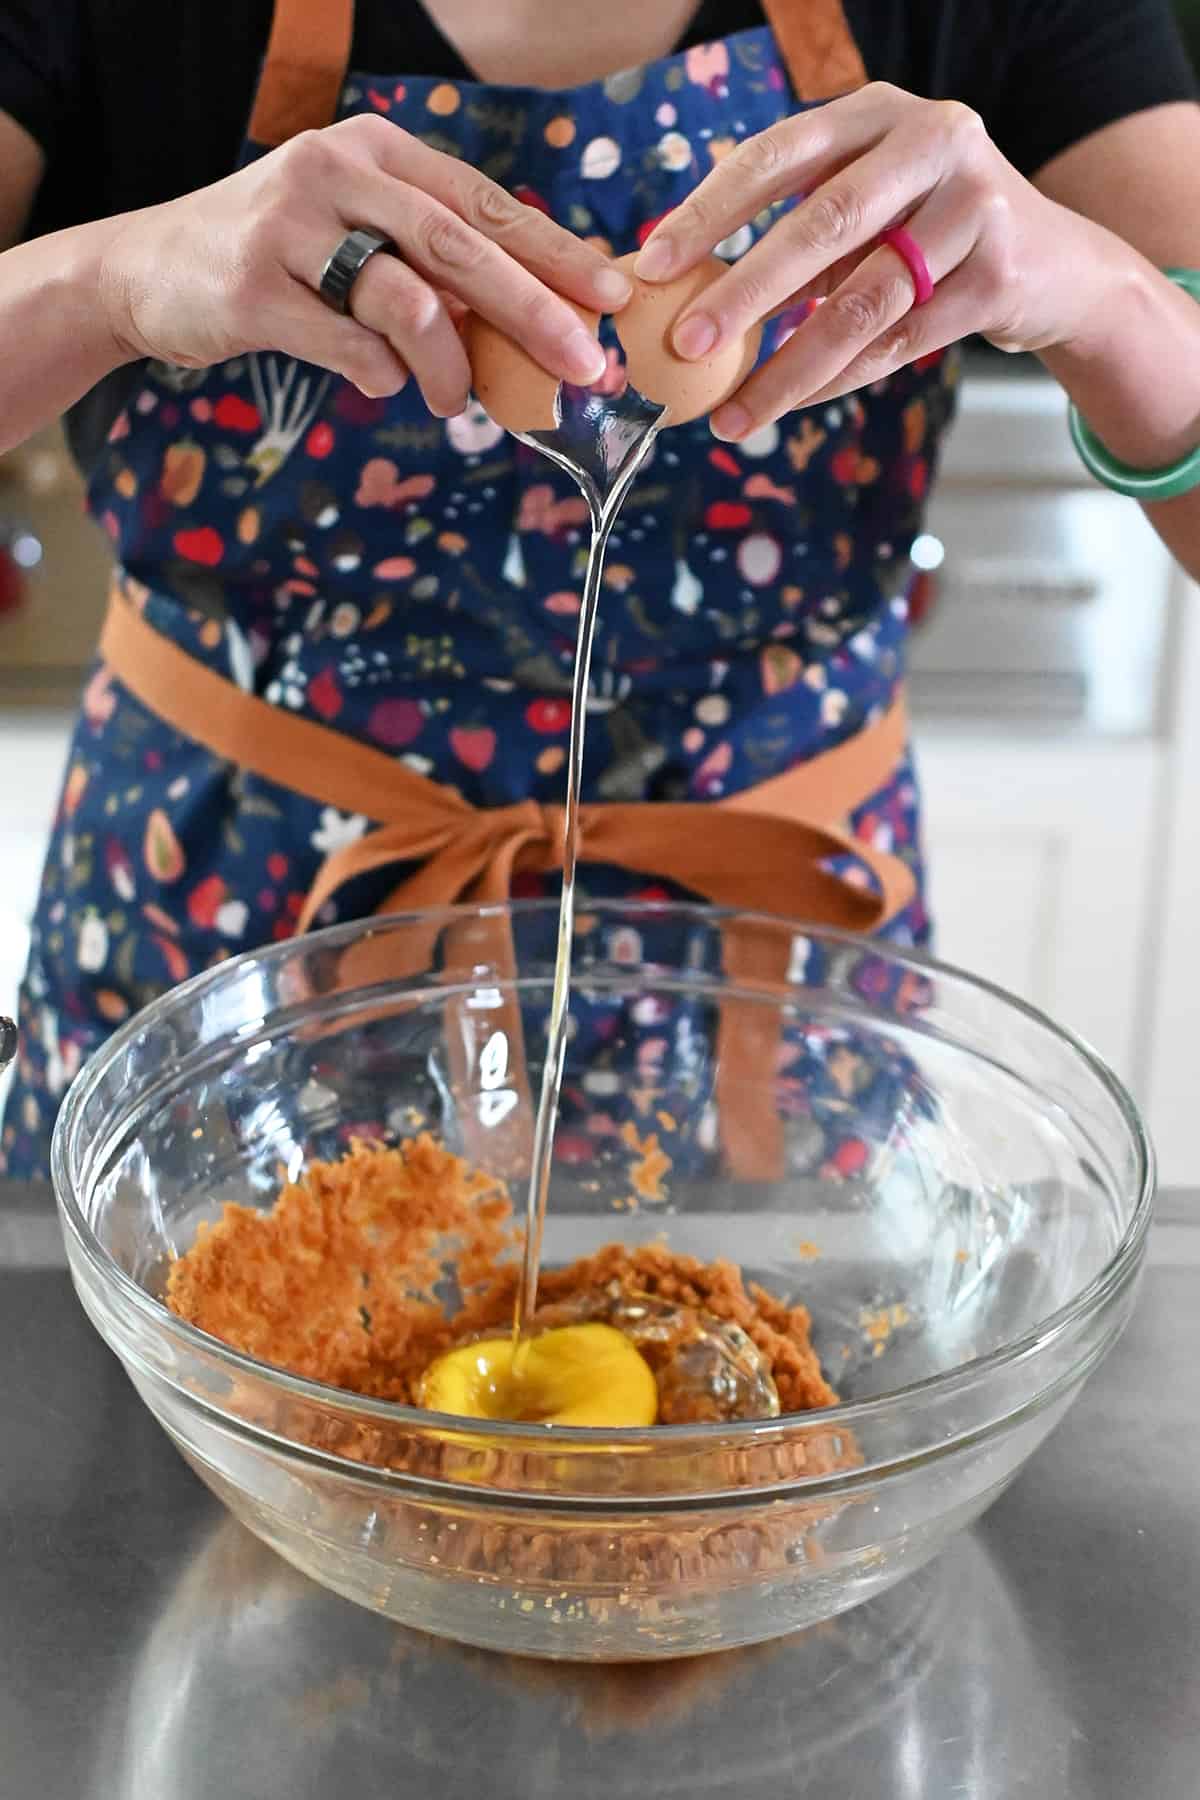 A person in a blue apron is cracking an egg into a bowl filled with coconut sugar, melted coconut oil, and vanilla extract.